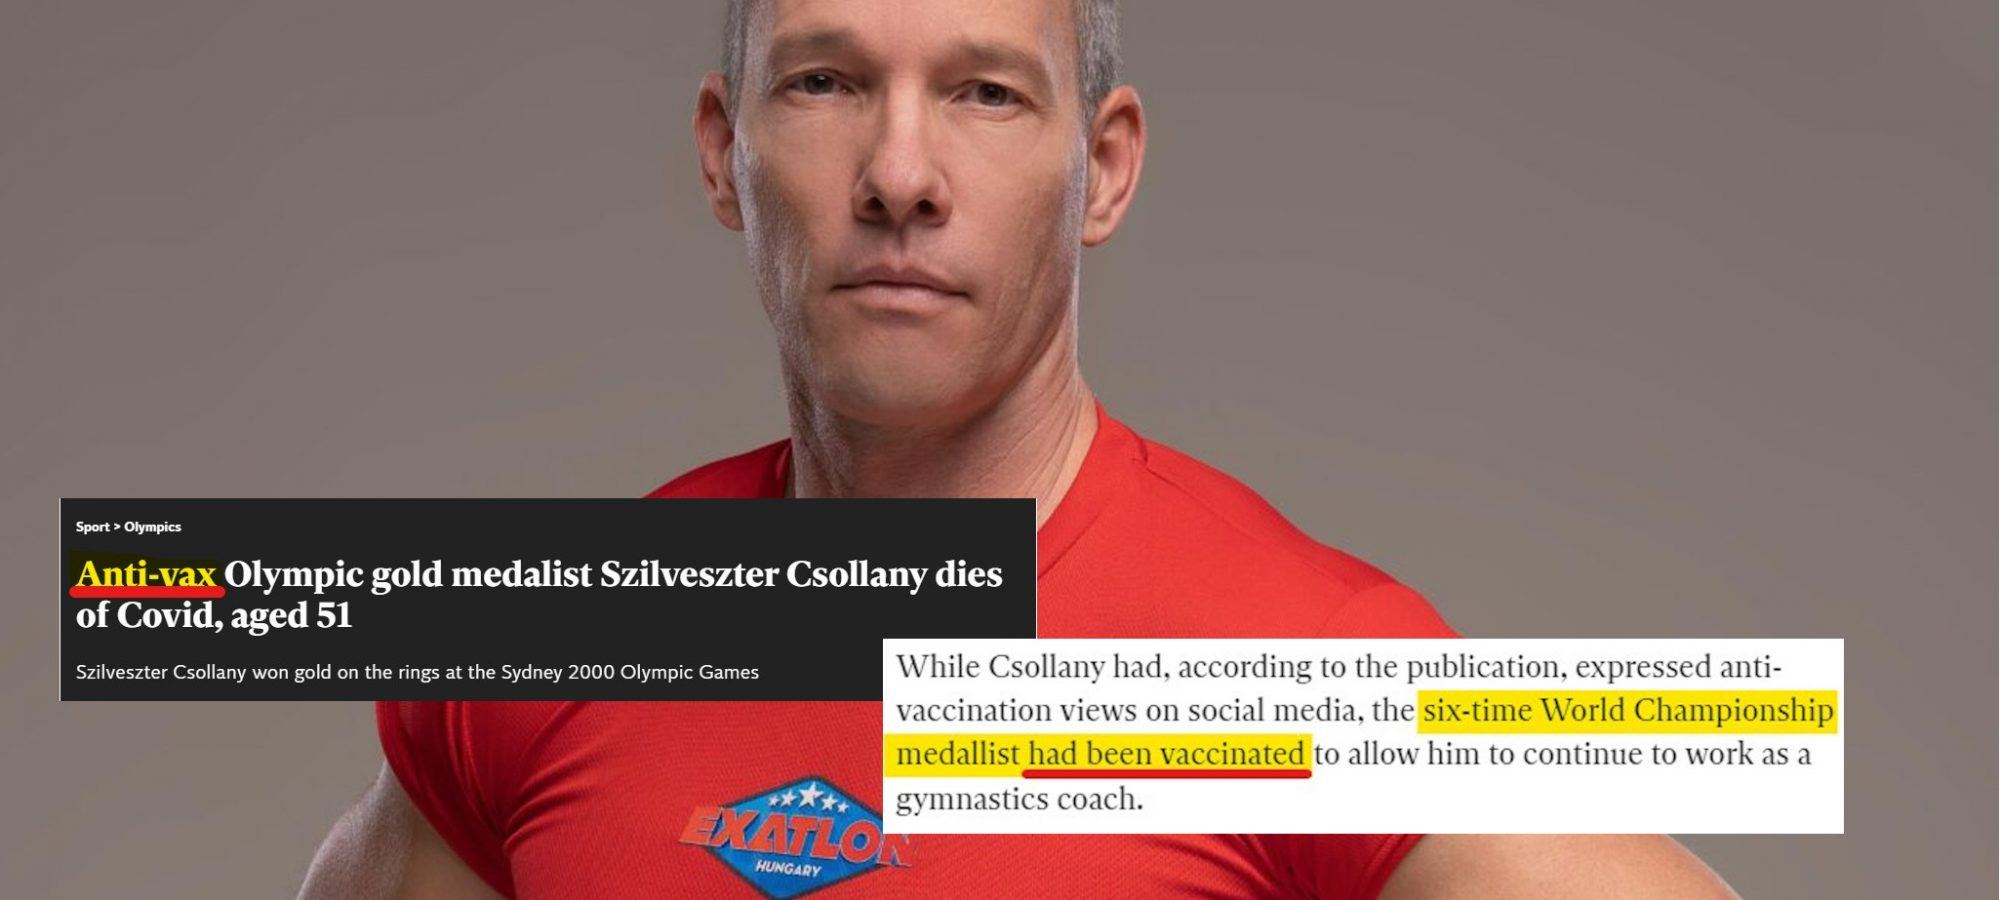 Independent szilveszter csollany banner 2000x900 1 | 76,253 dead 6,033,218 injured recorded in europe and usa following covid vaccines with 4,358 fetal deaths in u.s. | health